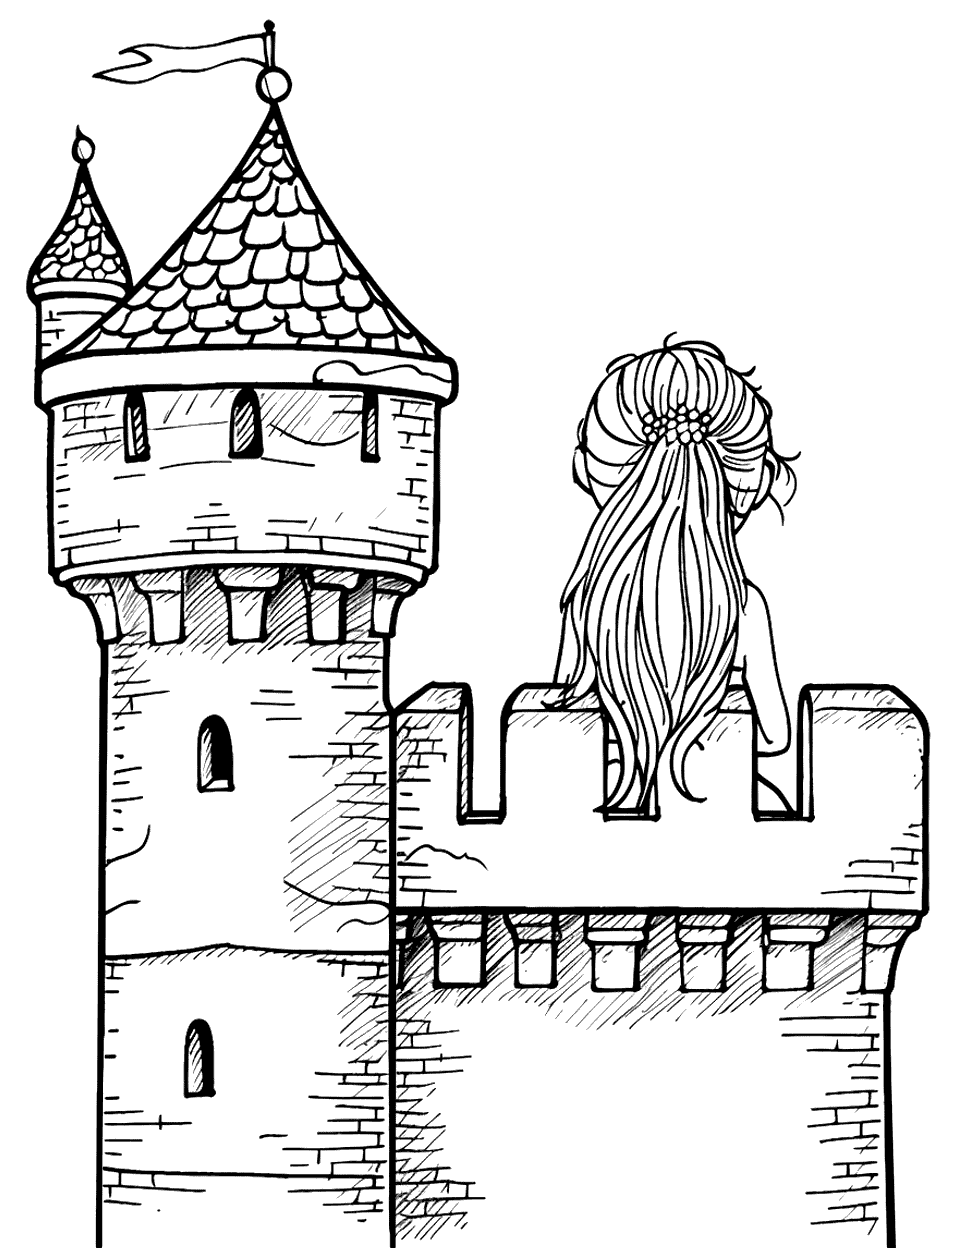 Princess in Tower Castle Coloring Page - A beautiful princess looking out from the highest tower of a fairy castle.